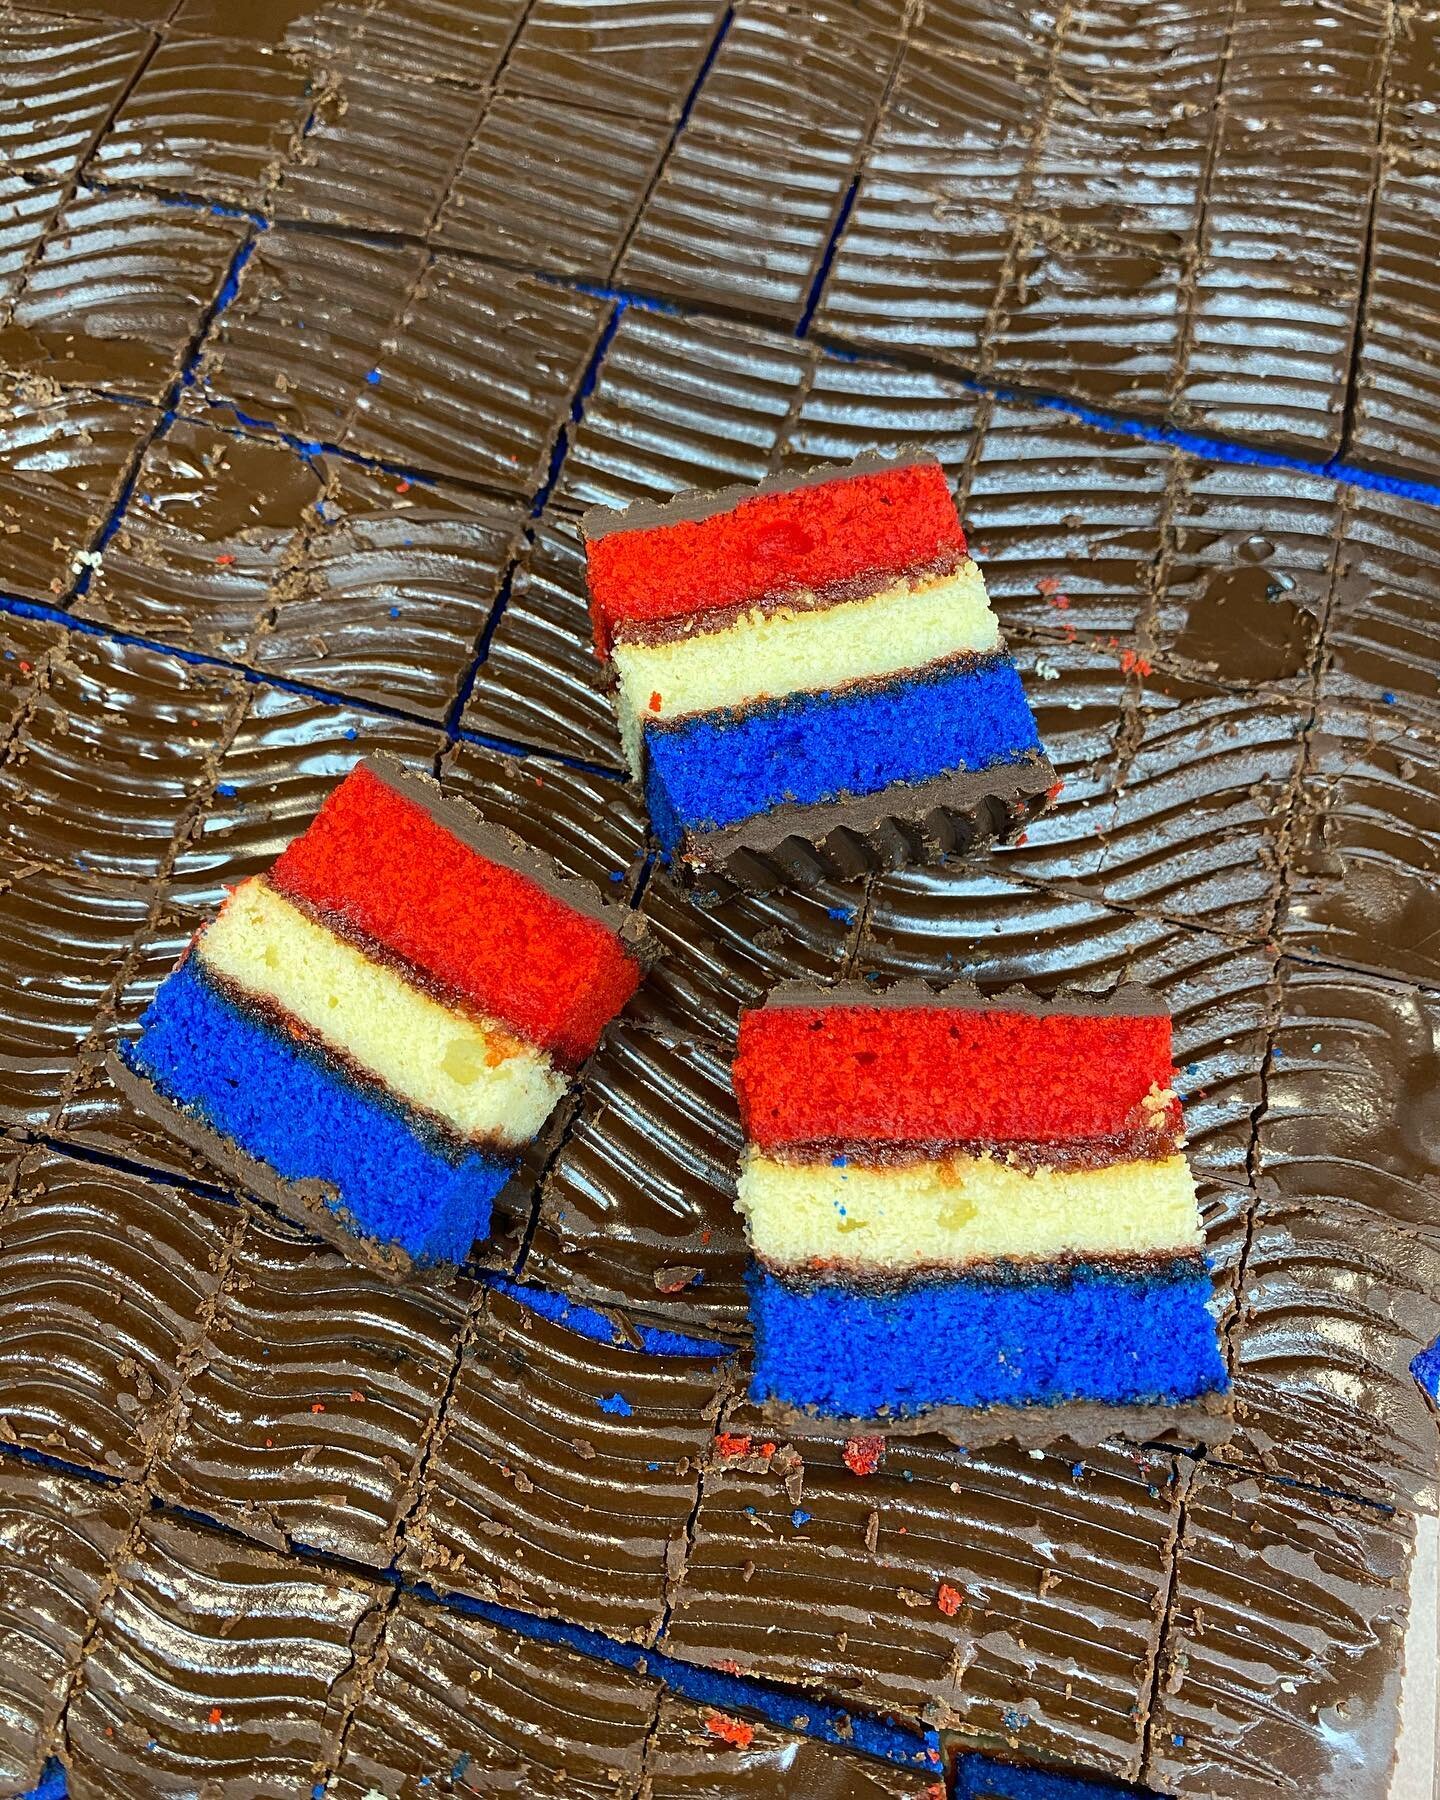 Happy Memorial Day Weekend! Red, white &amp; blue rainbow cookies now available 🇺🇸 #zeppieribakery